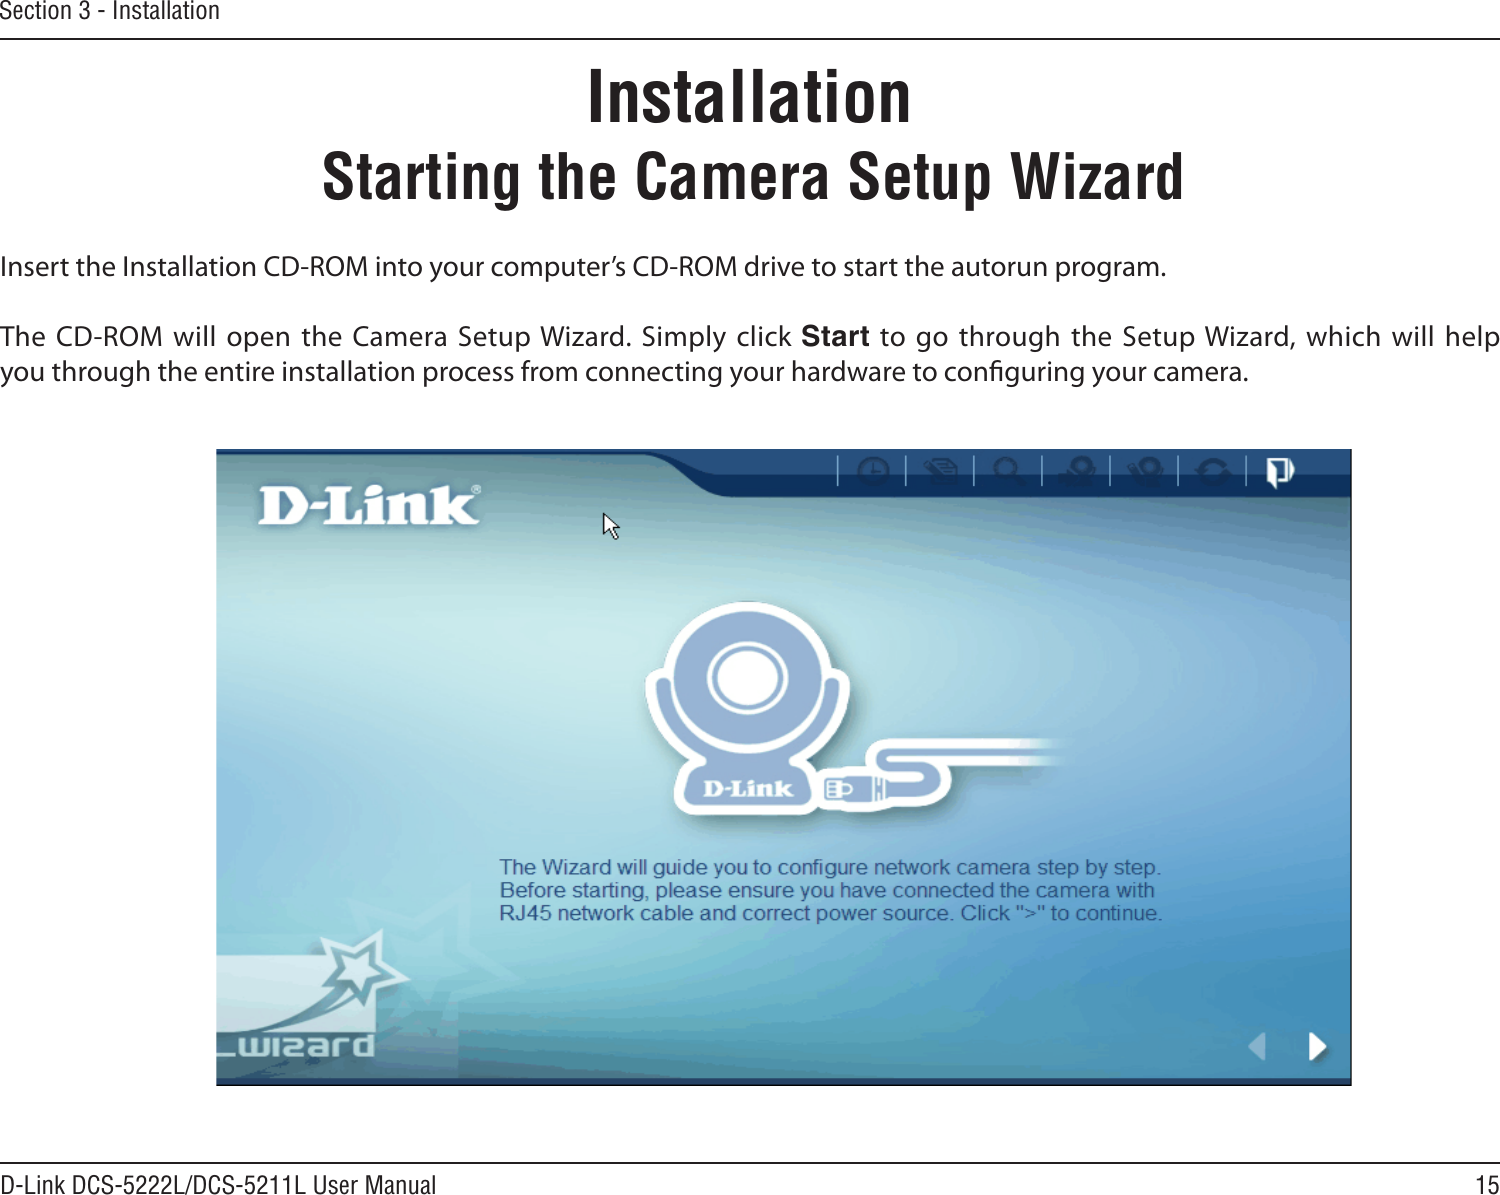 15D-Link DCS-5222L/DCS-5211L User ManualSection 3 - InstallationInsert the Installation CD-ROM into your computer’s CD-ROM drive to start the autorun program. The CD-ROM will  open  the  Camera Setup Wizard. Simply click Start to go through the Setup Wizard, which will help you through the entire installation process from connecting your hardware to conguring your camera.Starting the Camera Setup WizardInstallation